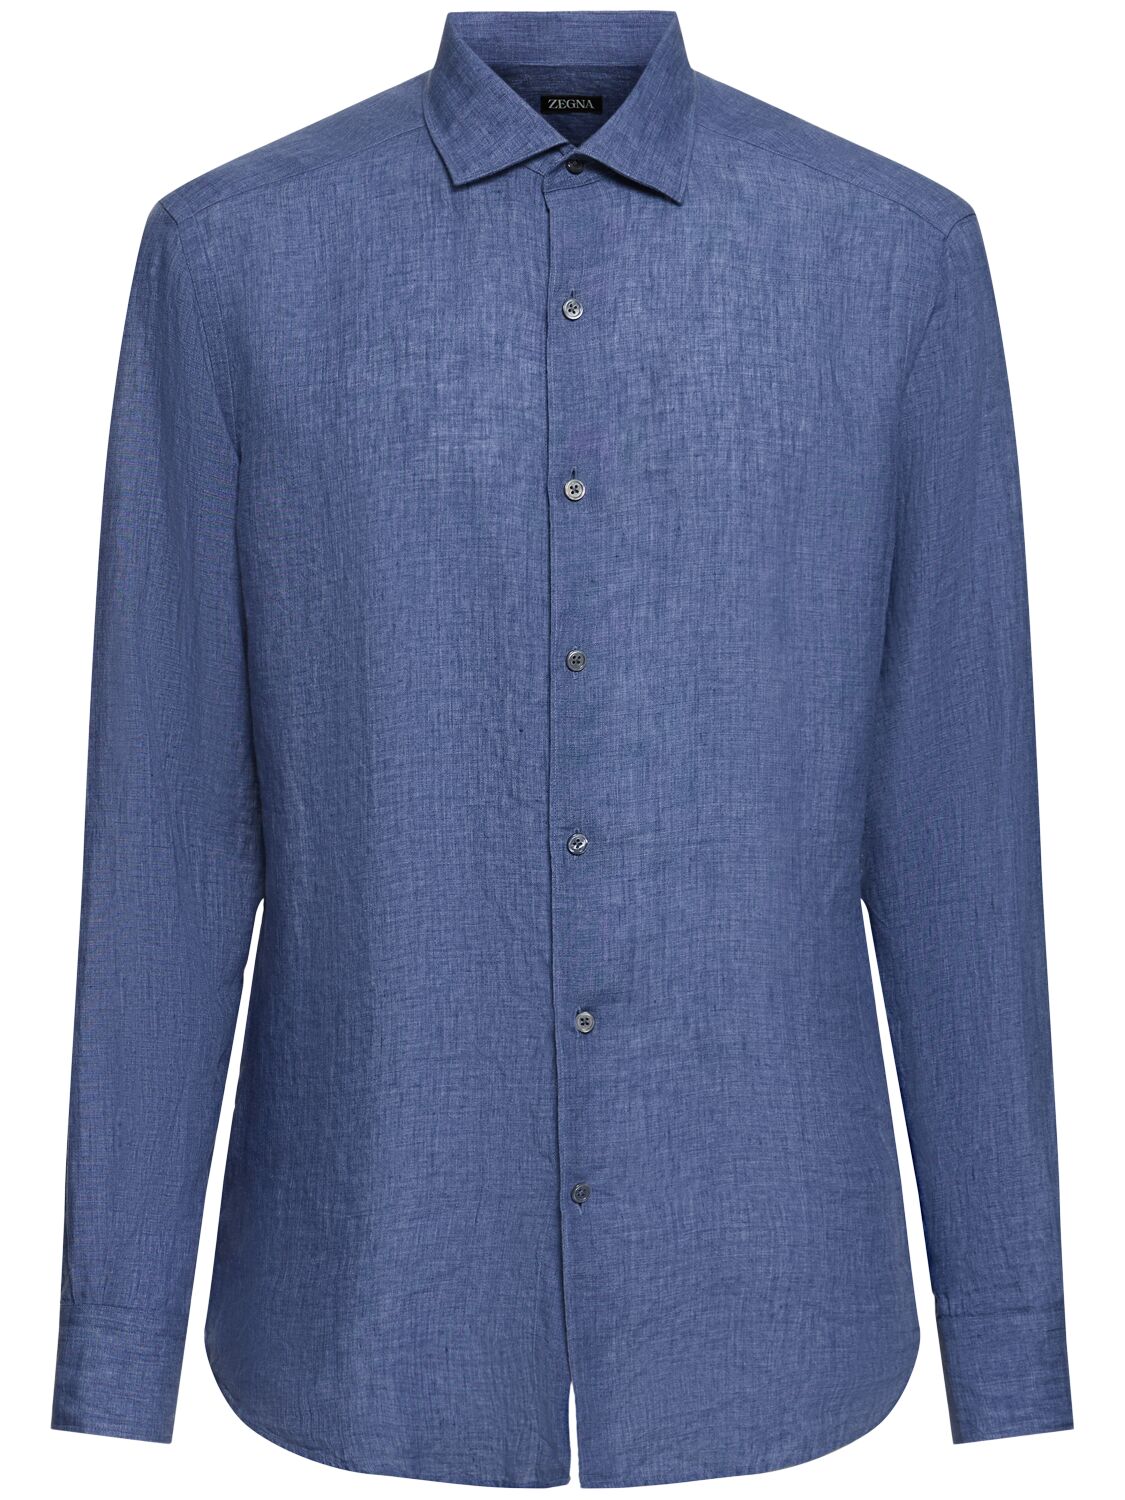 Zegna Solid Pure Linen Long Sleeve Shirt In Blue